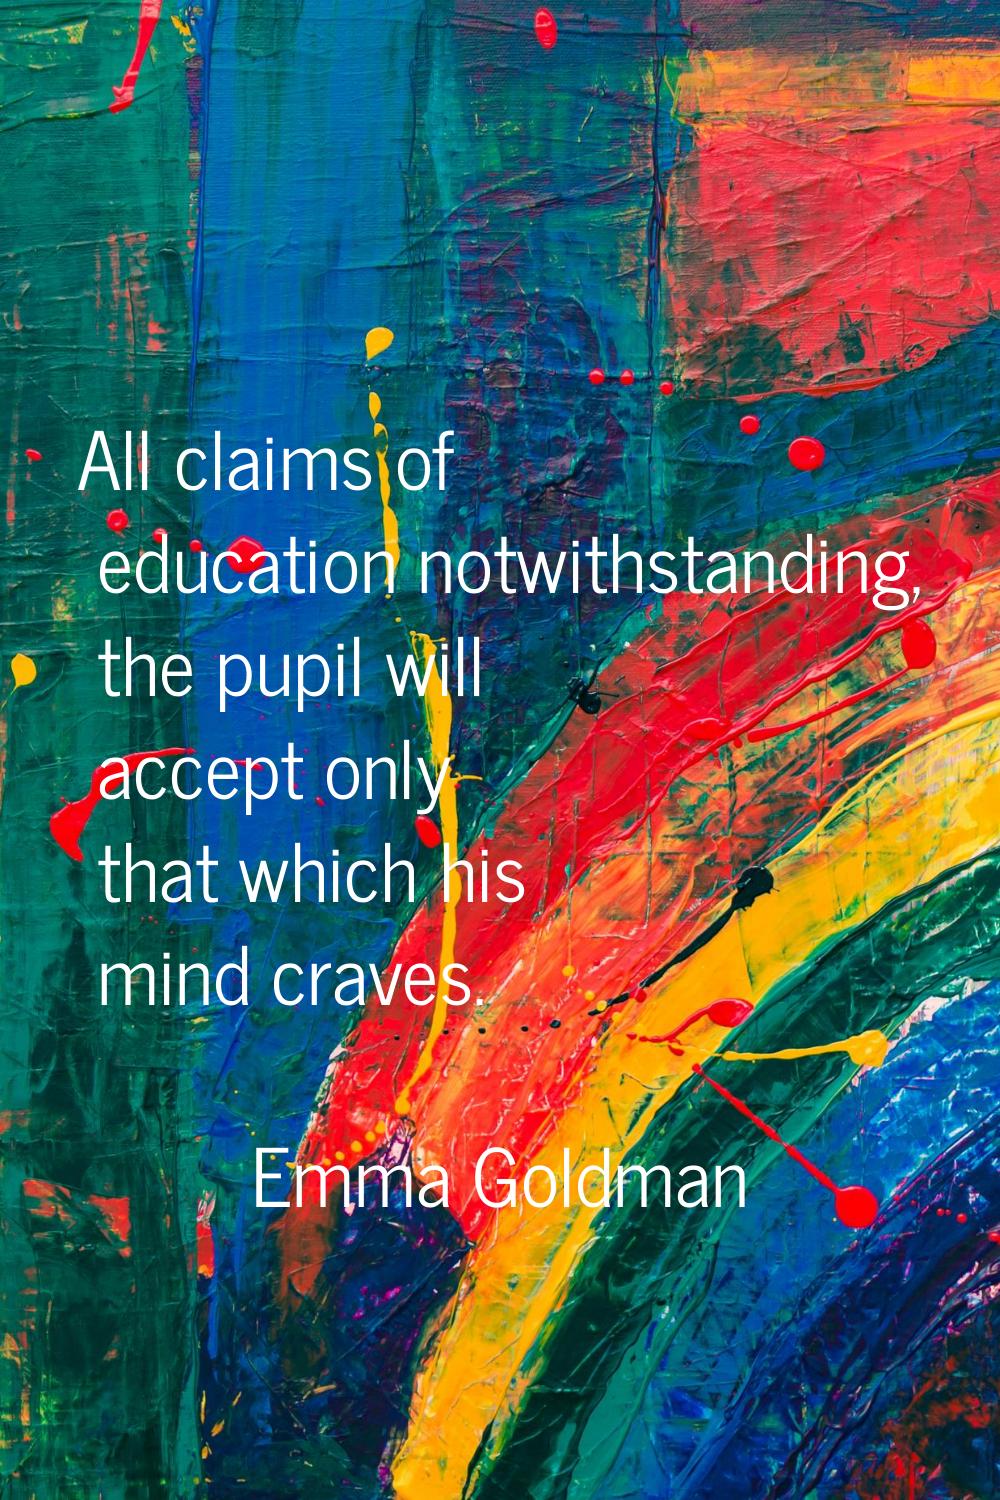 All claims of education notwithstanding, the pupil will accept only that which his mind craves.